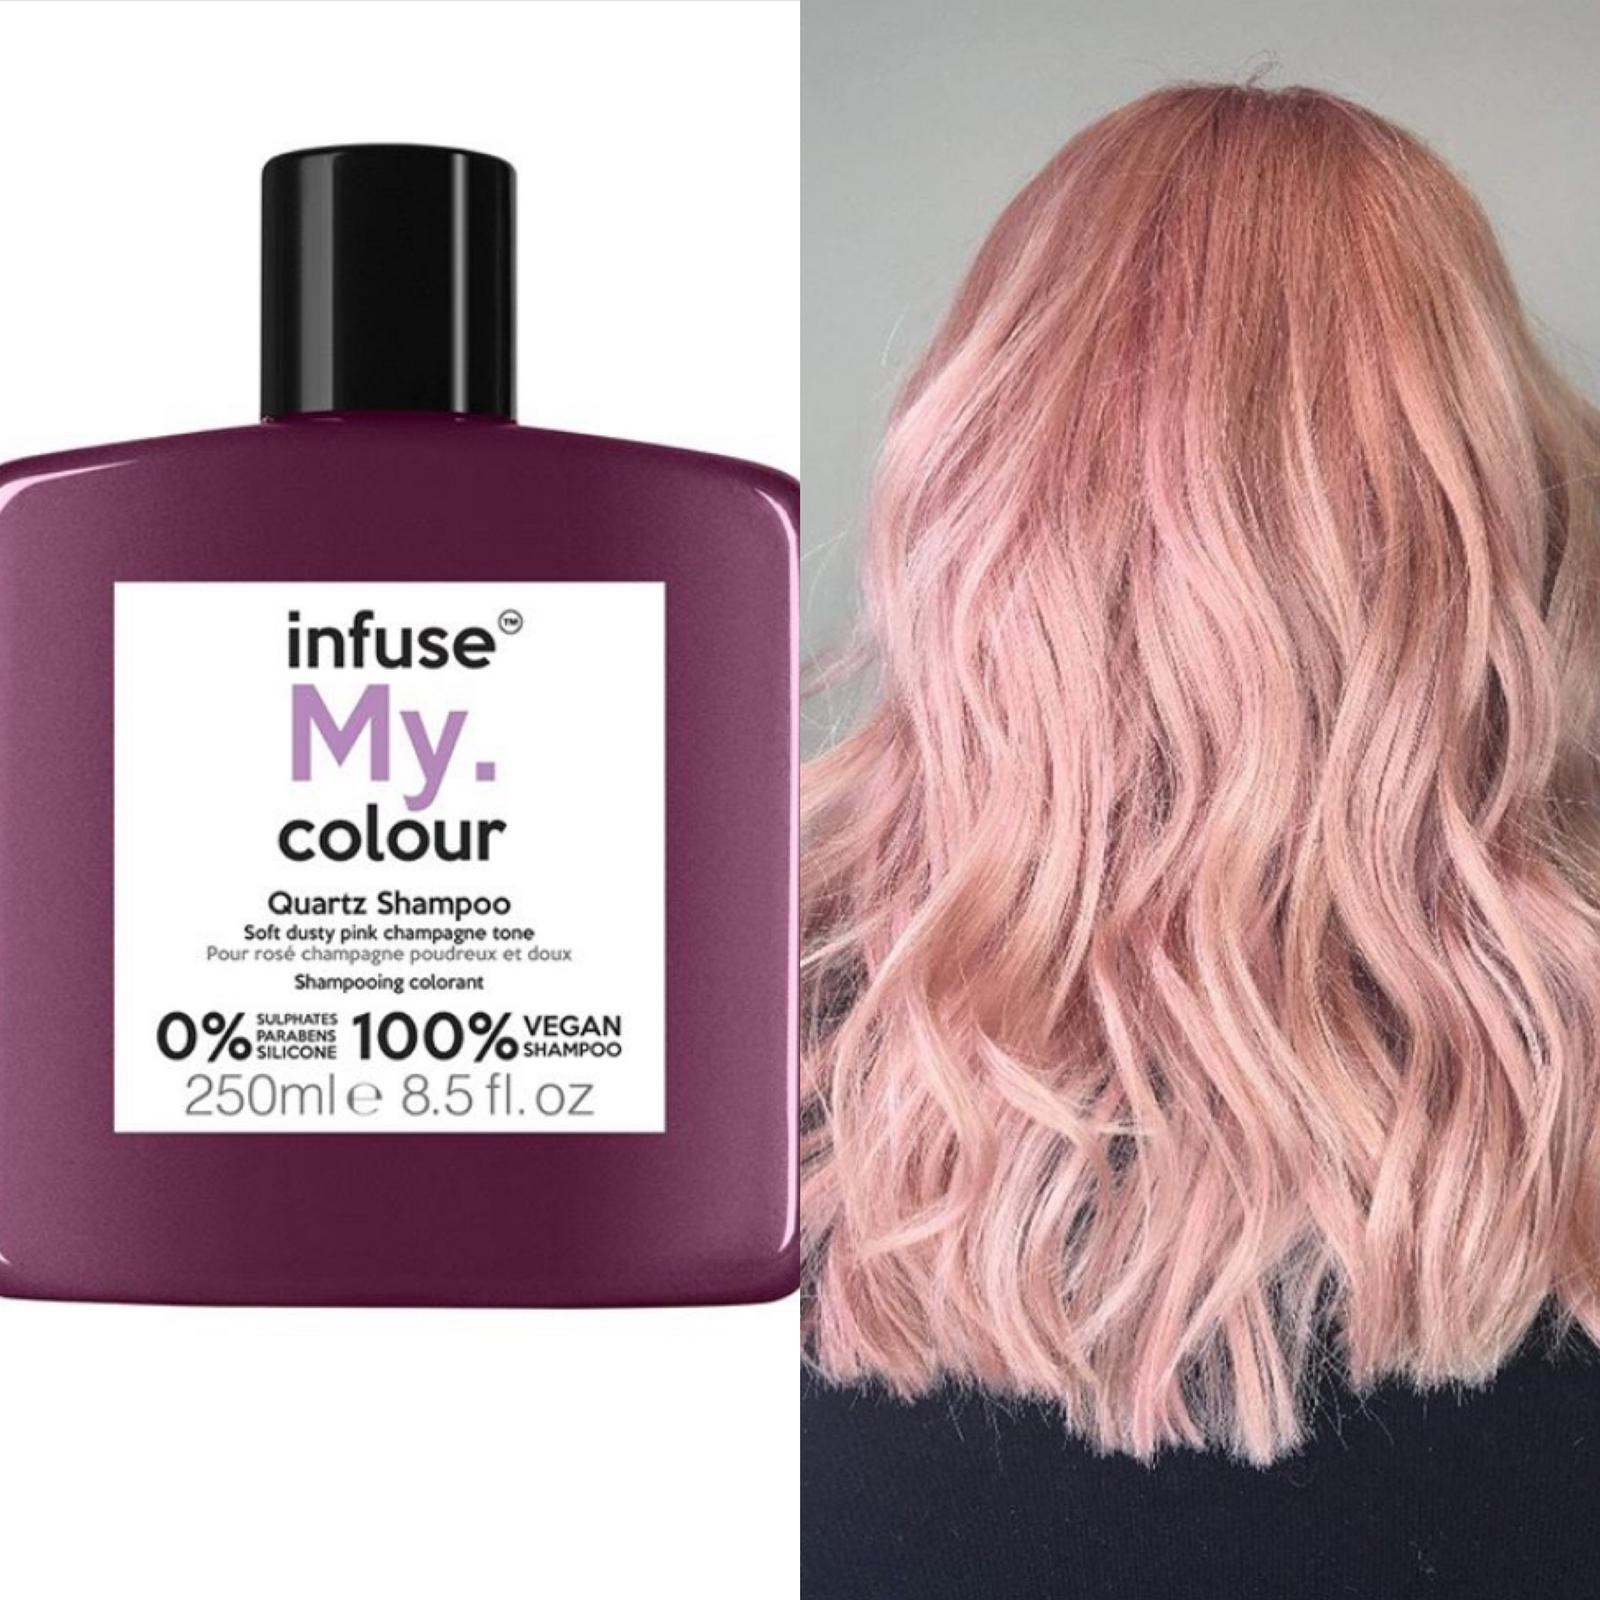 Infuse My Colour Shampoos